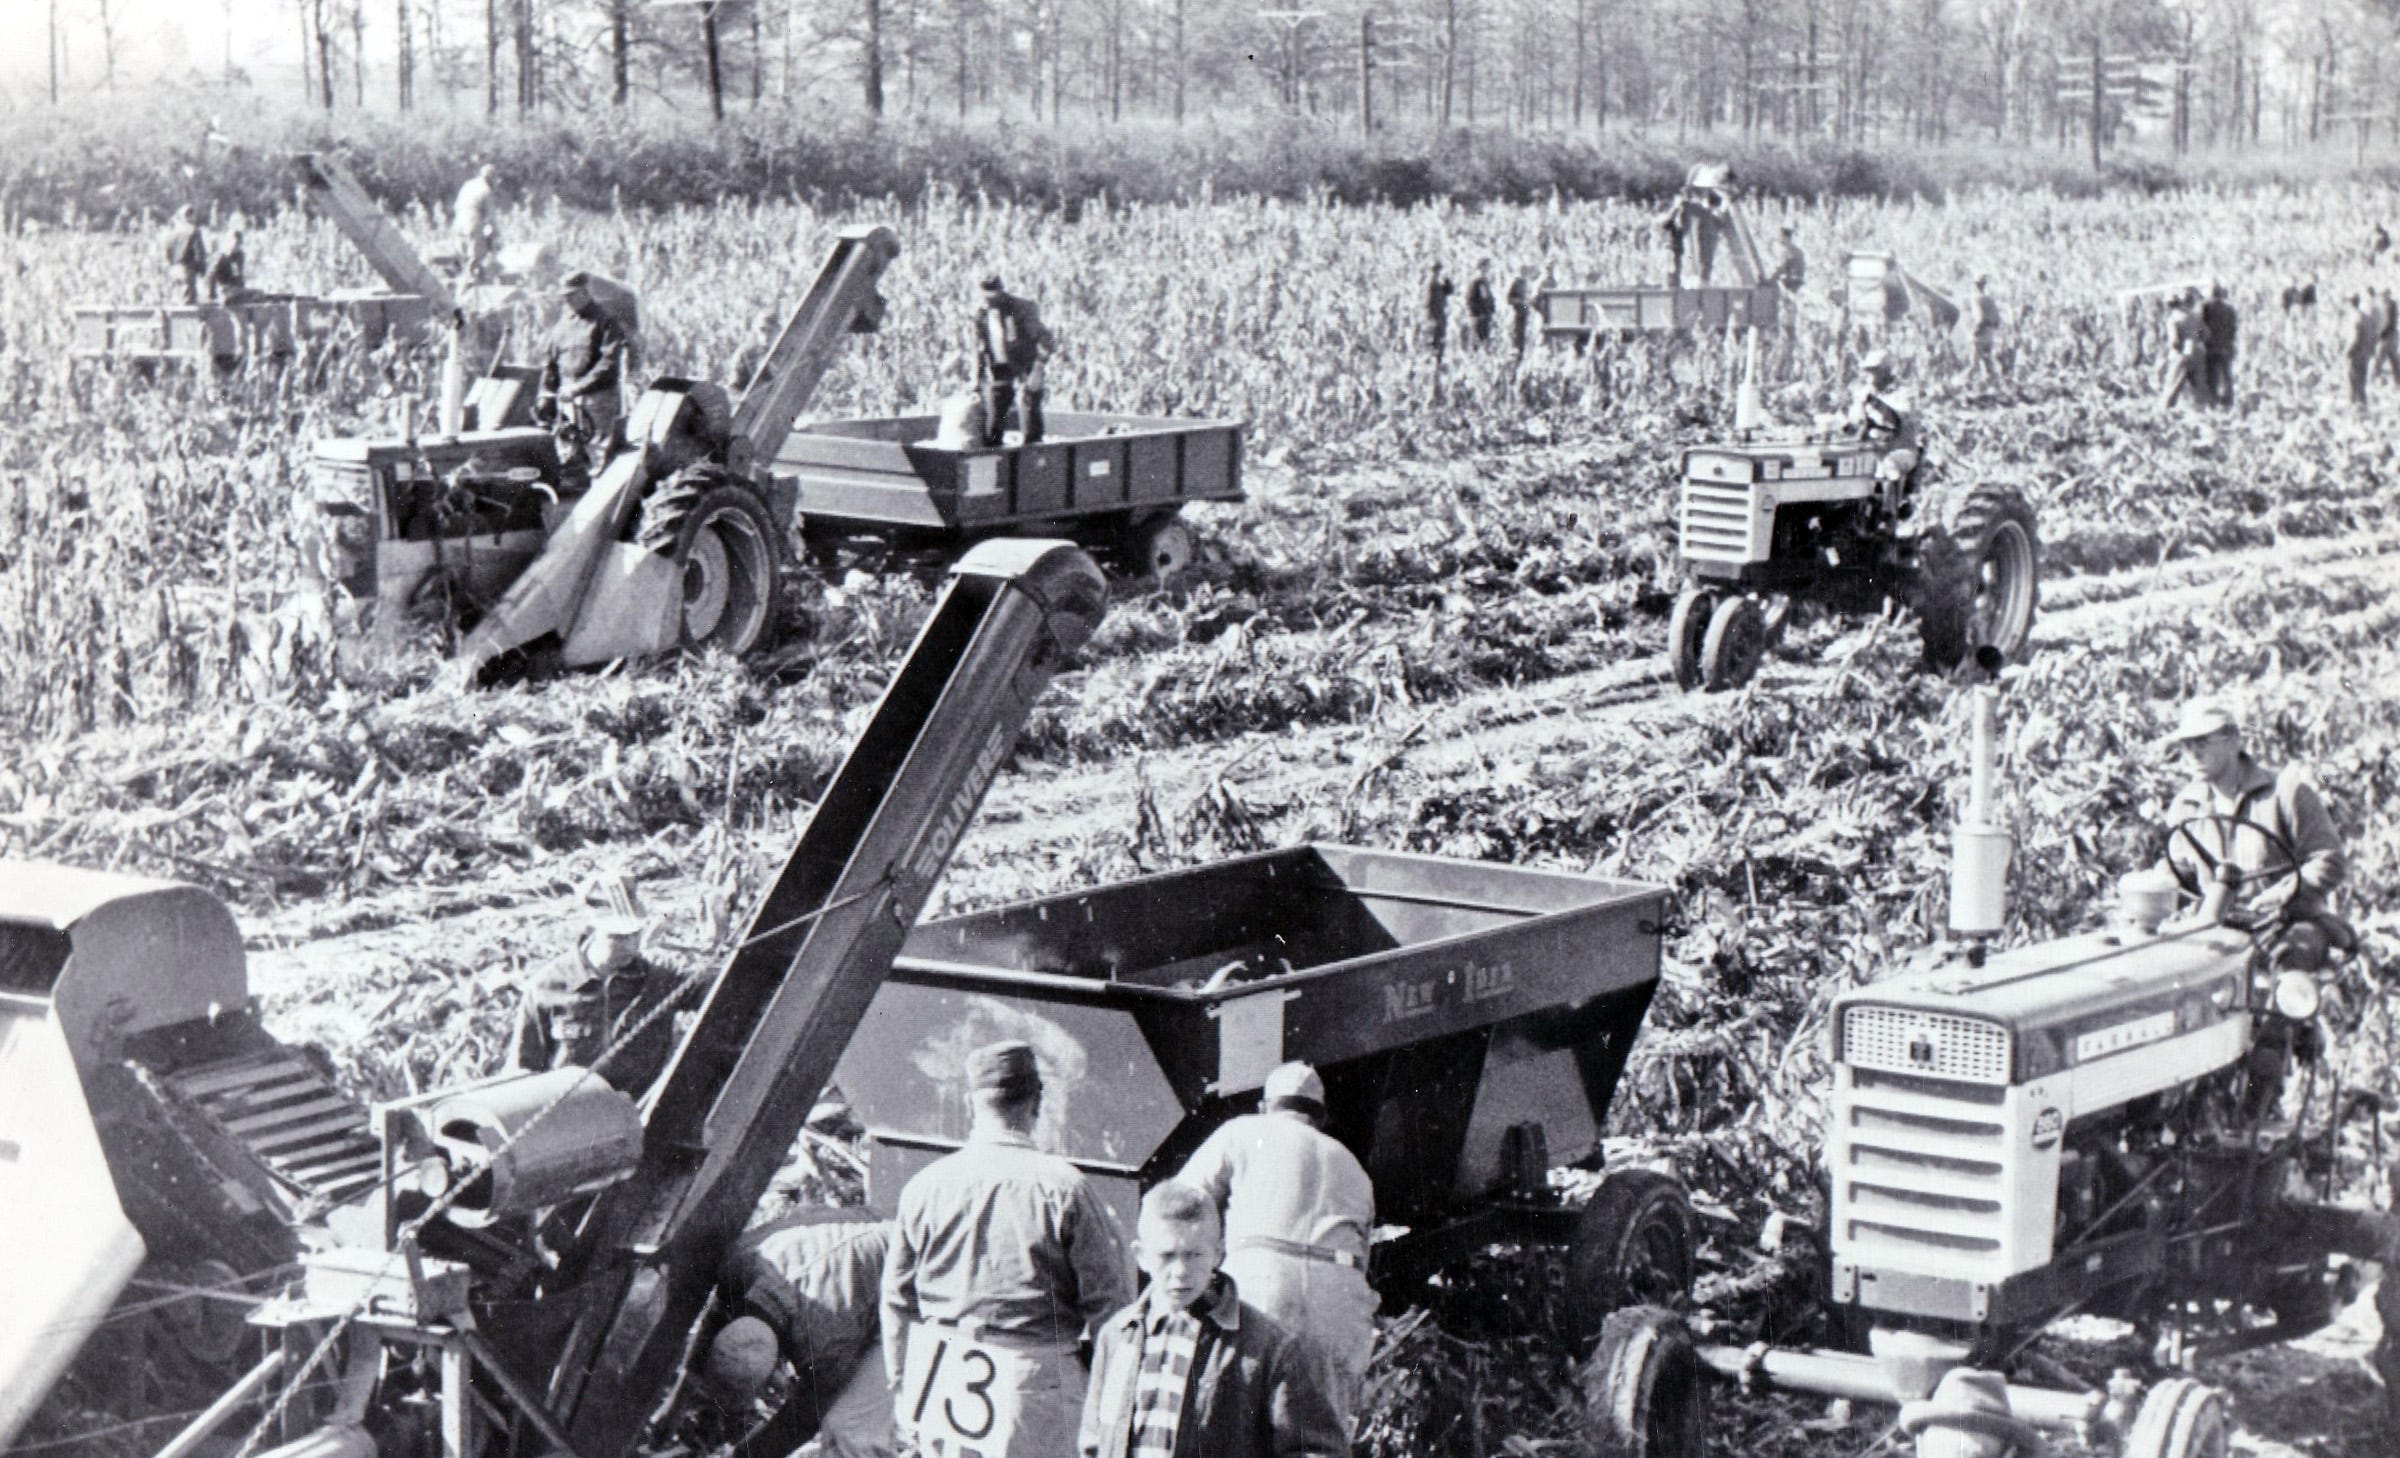 Mechanical corn picking contests were sponsored by corn breeders who worked to create hybrids that would work better for mechanical pickers. Pictured is a 1959 Indiana contest.